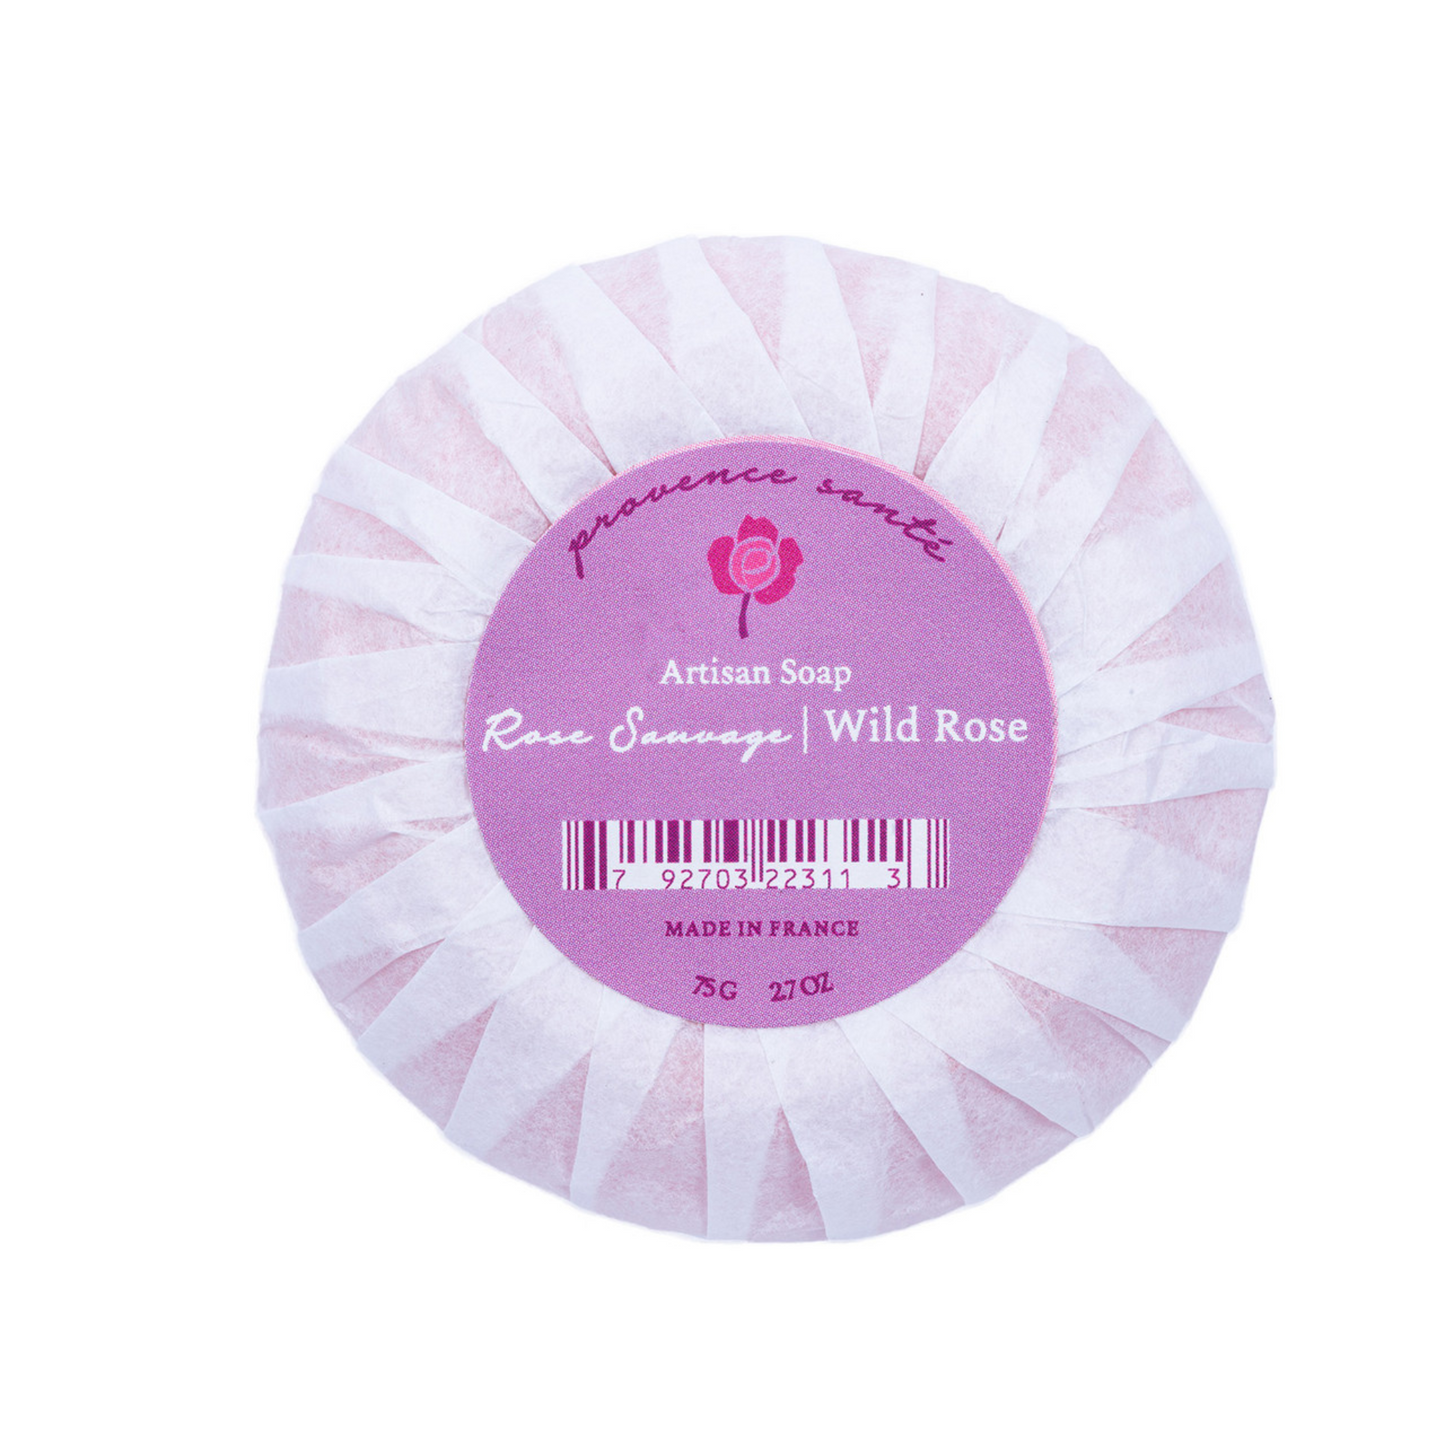 Primary image of Wild Rose Gift Soap